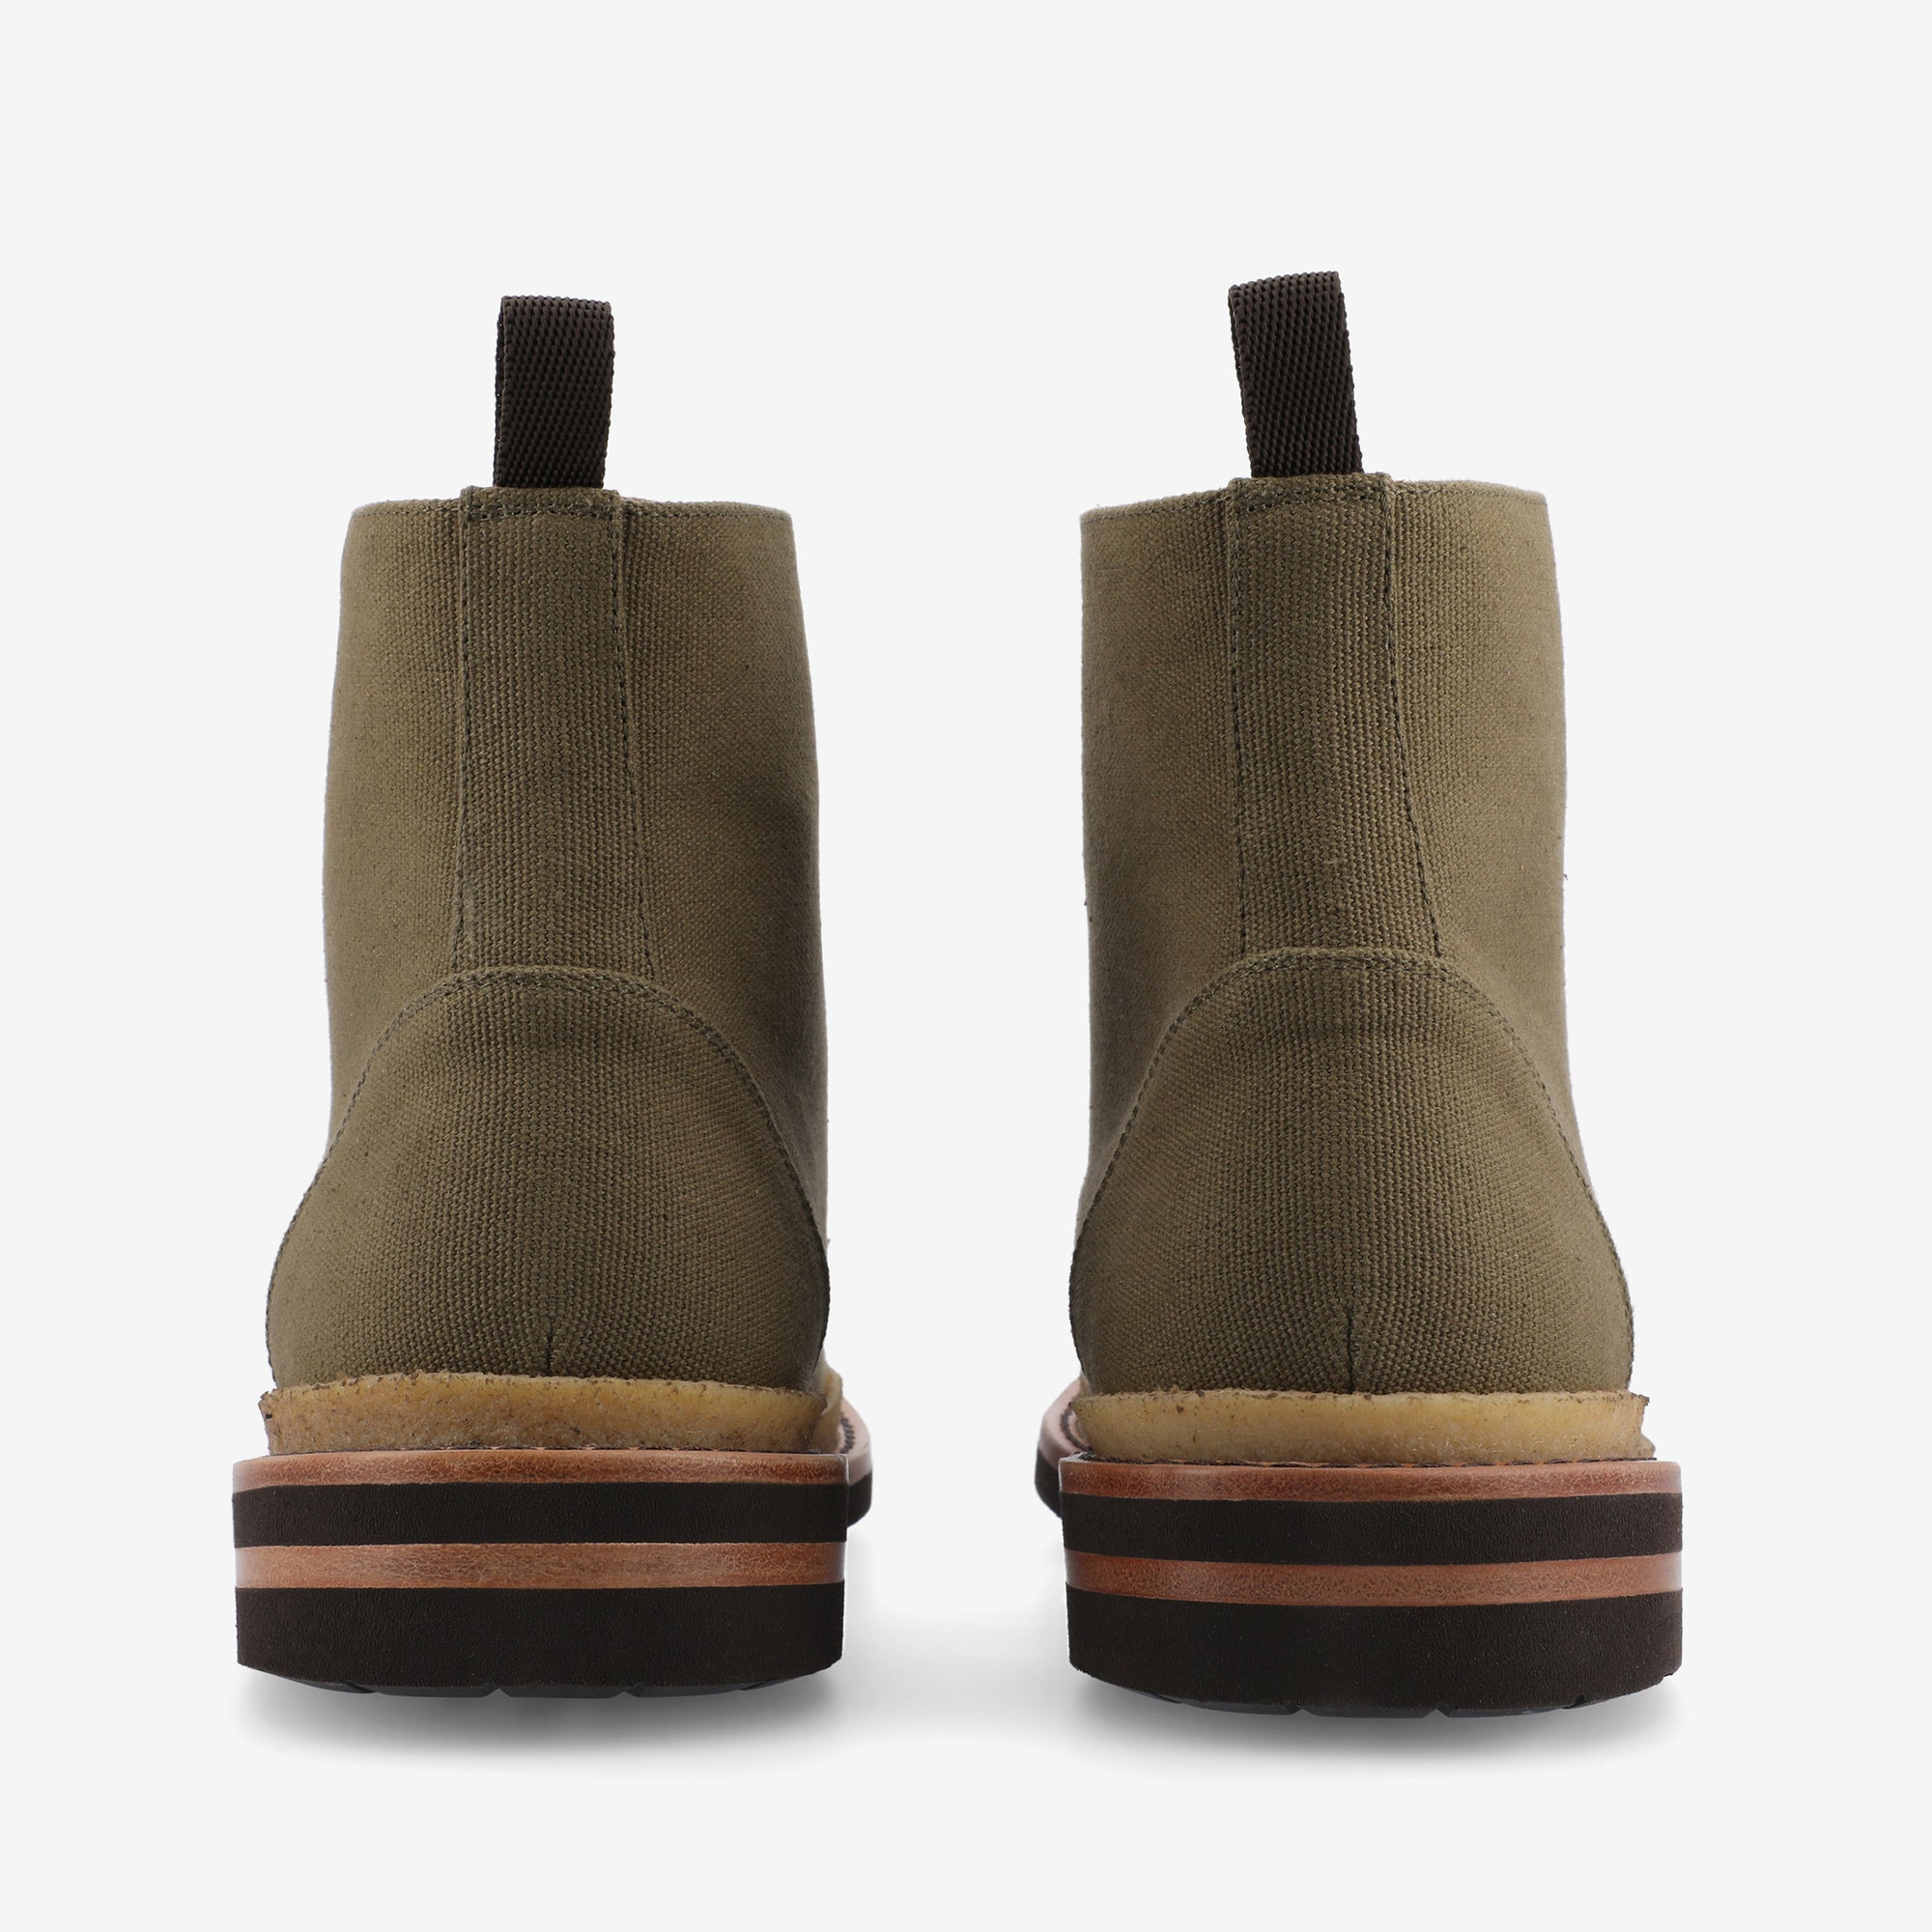 The Jaro Boot in Olive